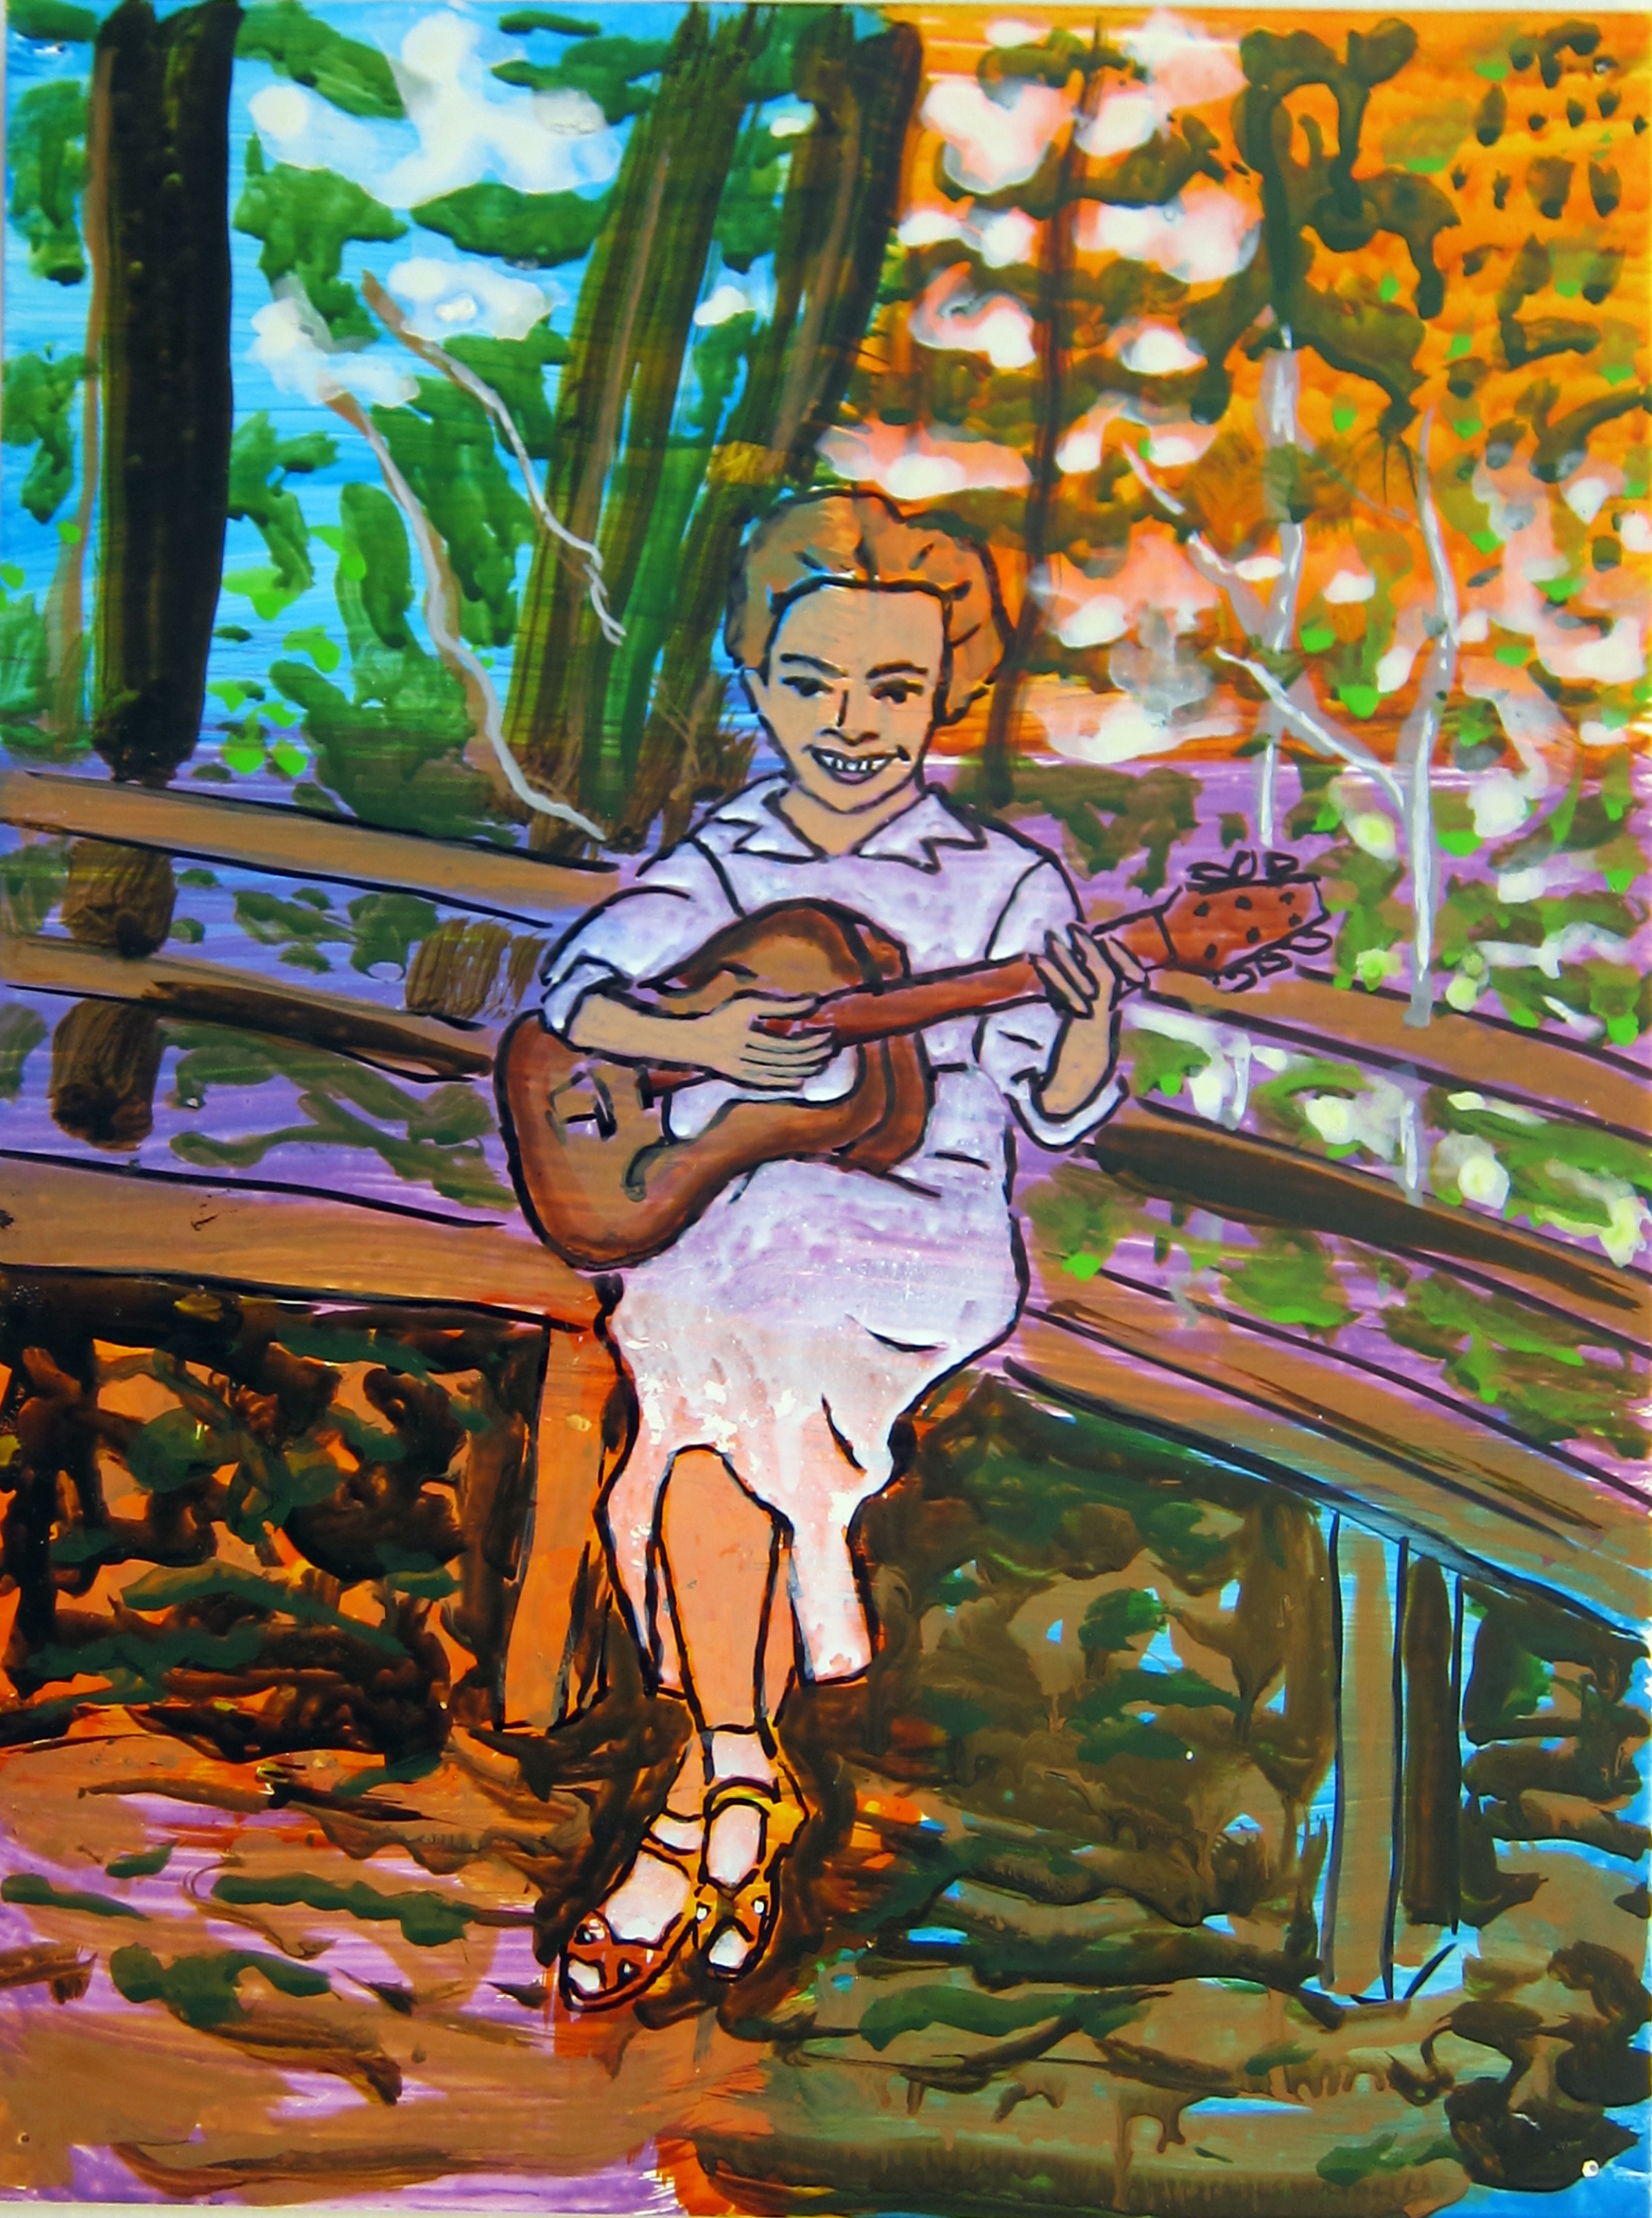   Woman With Guitar , 2016  12"x9.5" ink on paper  PRIVATE COLLECTION  